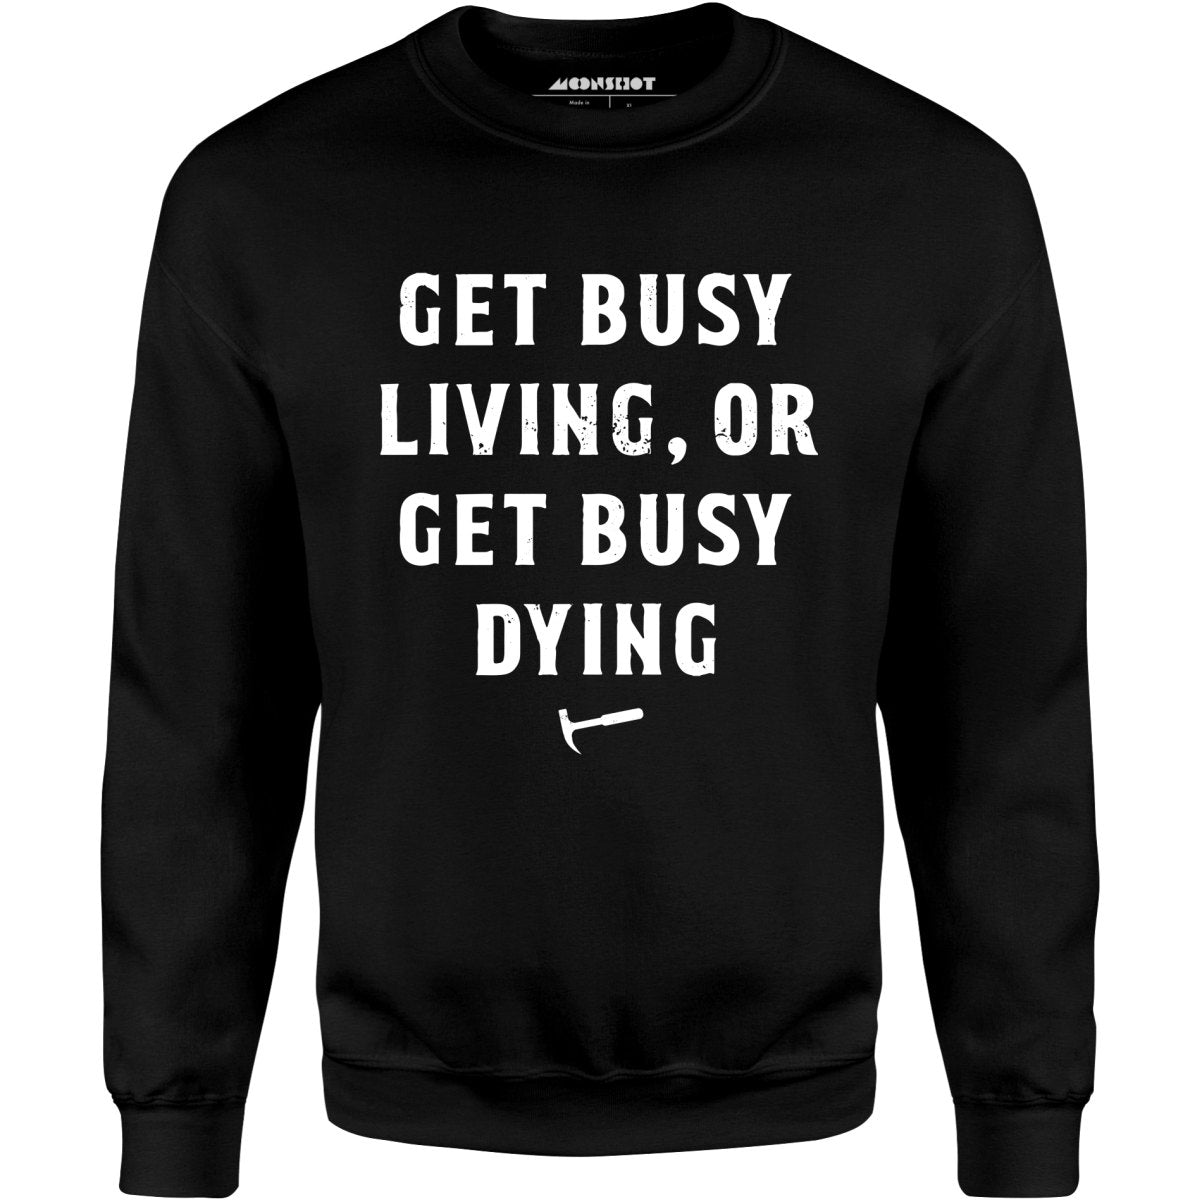 Get Busy Living or Get Busy Dying - Unisex Sweatshirt